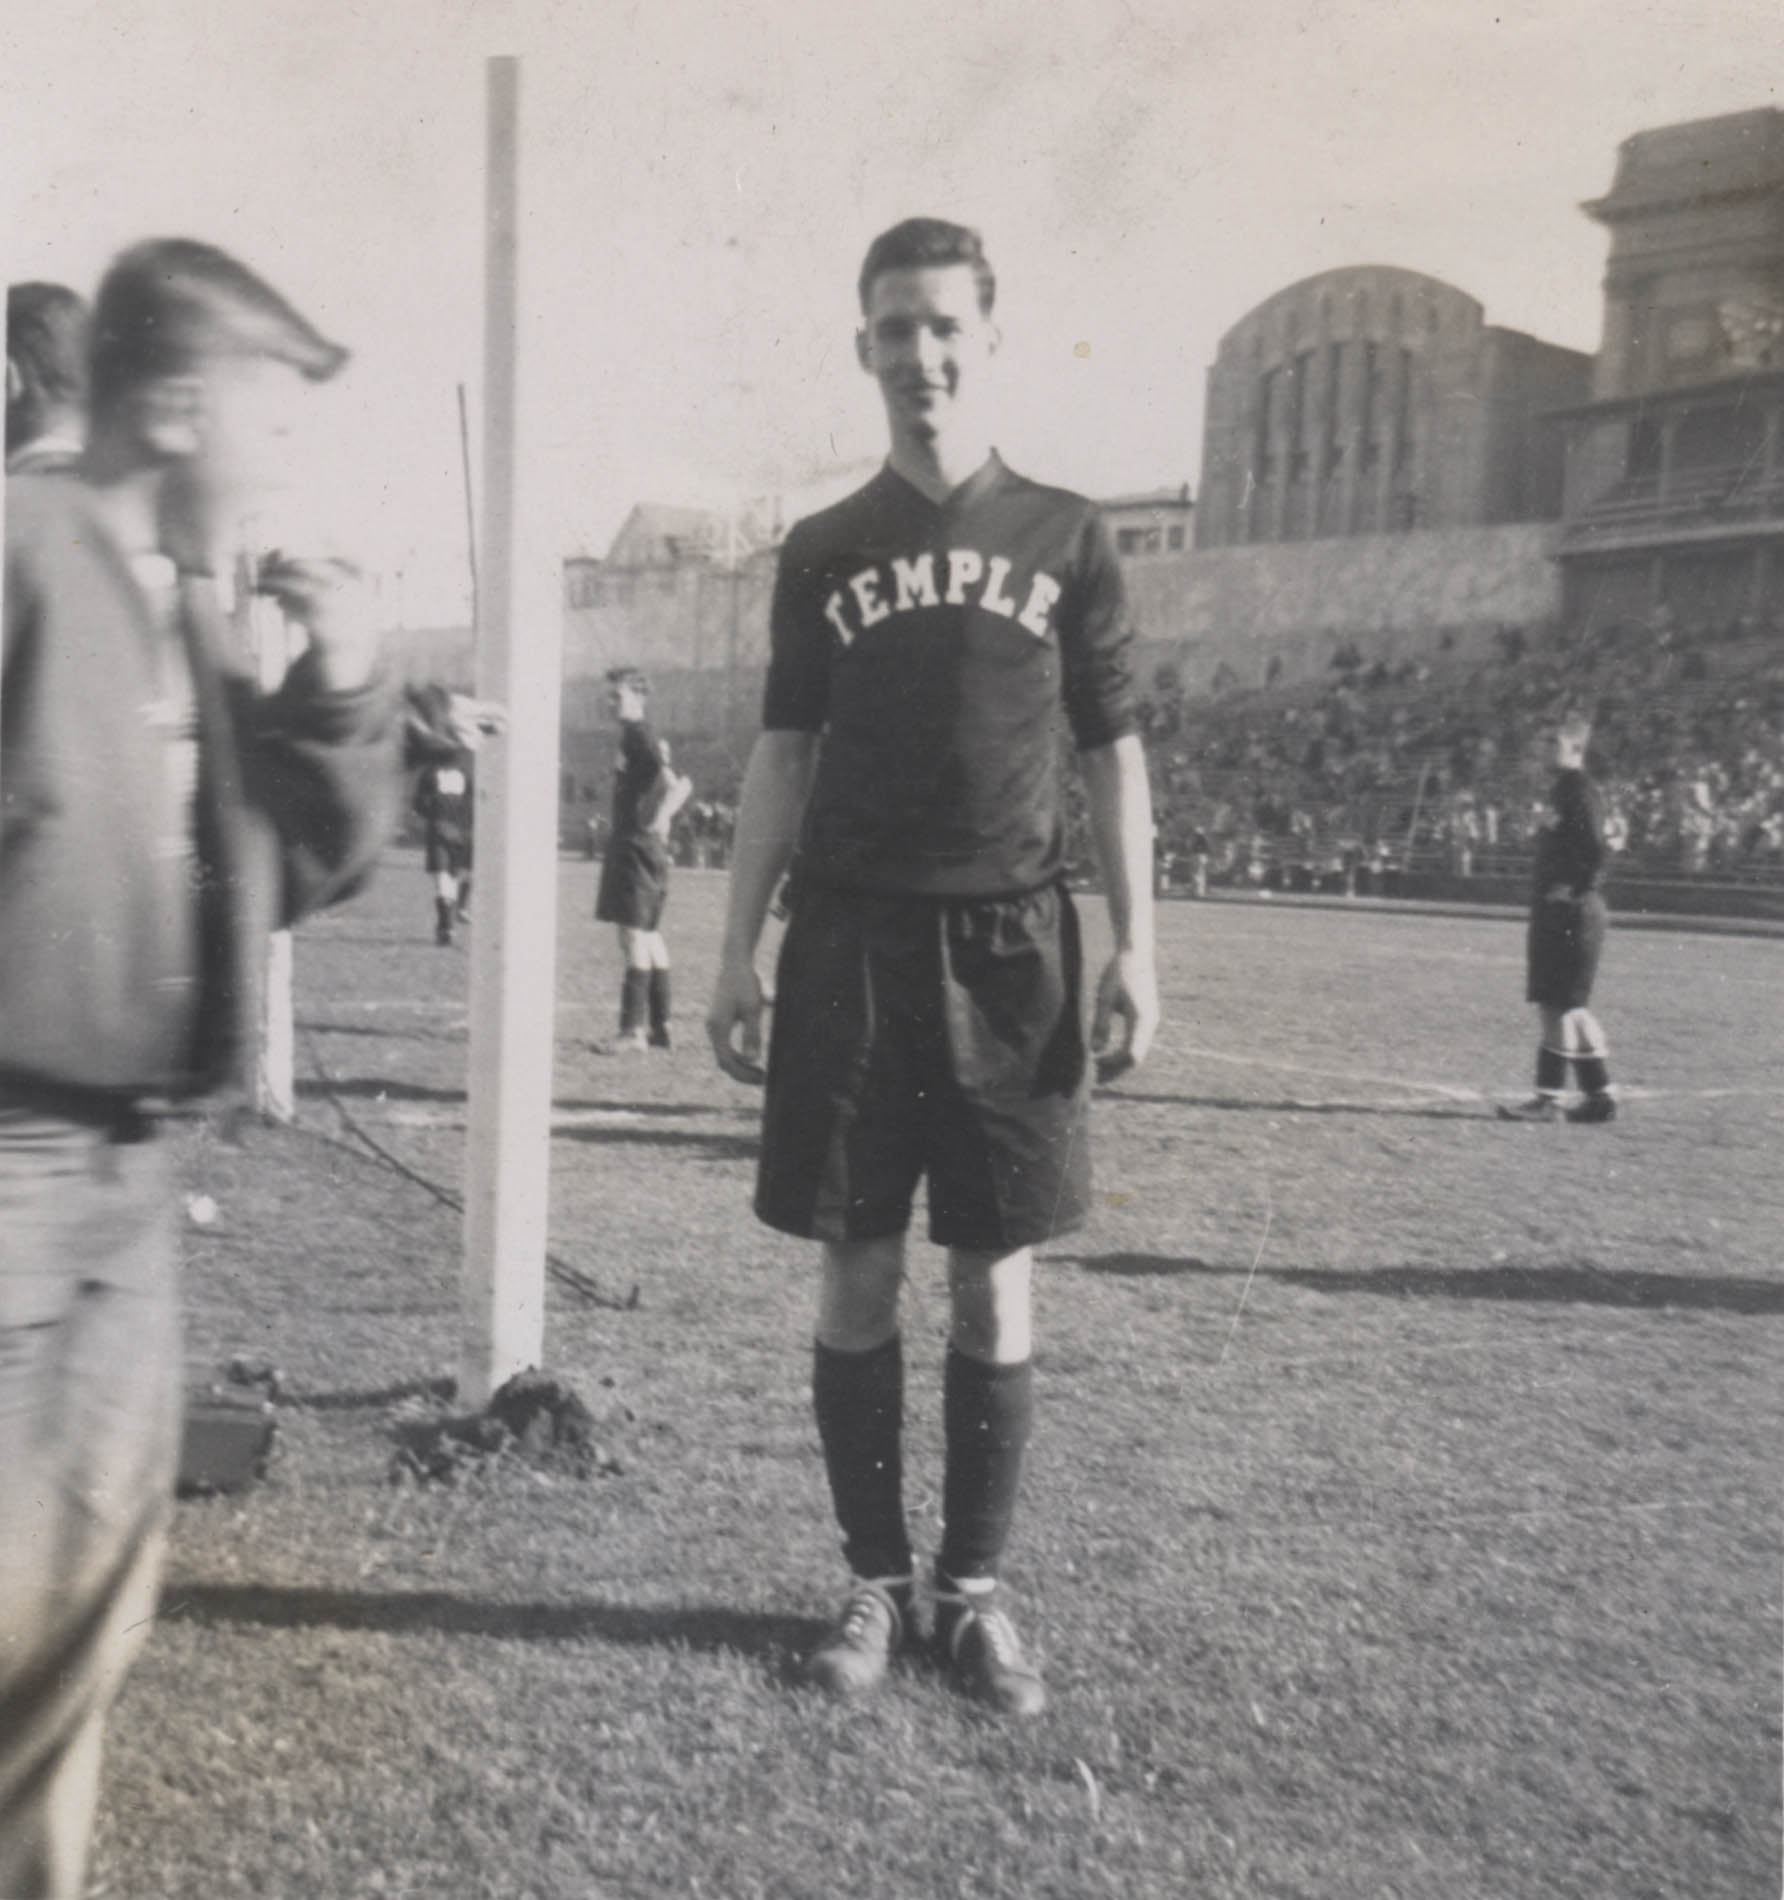 Oliver at the 1951 College Bowl in San Francisco. Photo courtesy of Len Oliver.